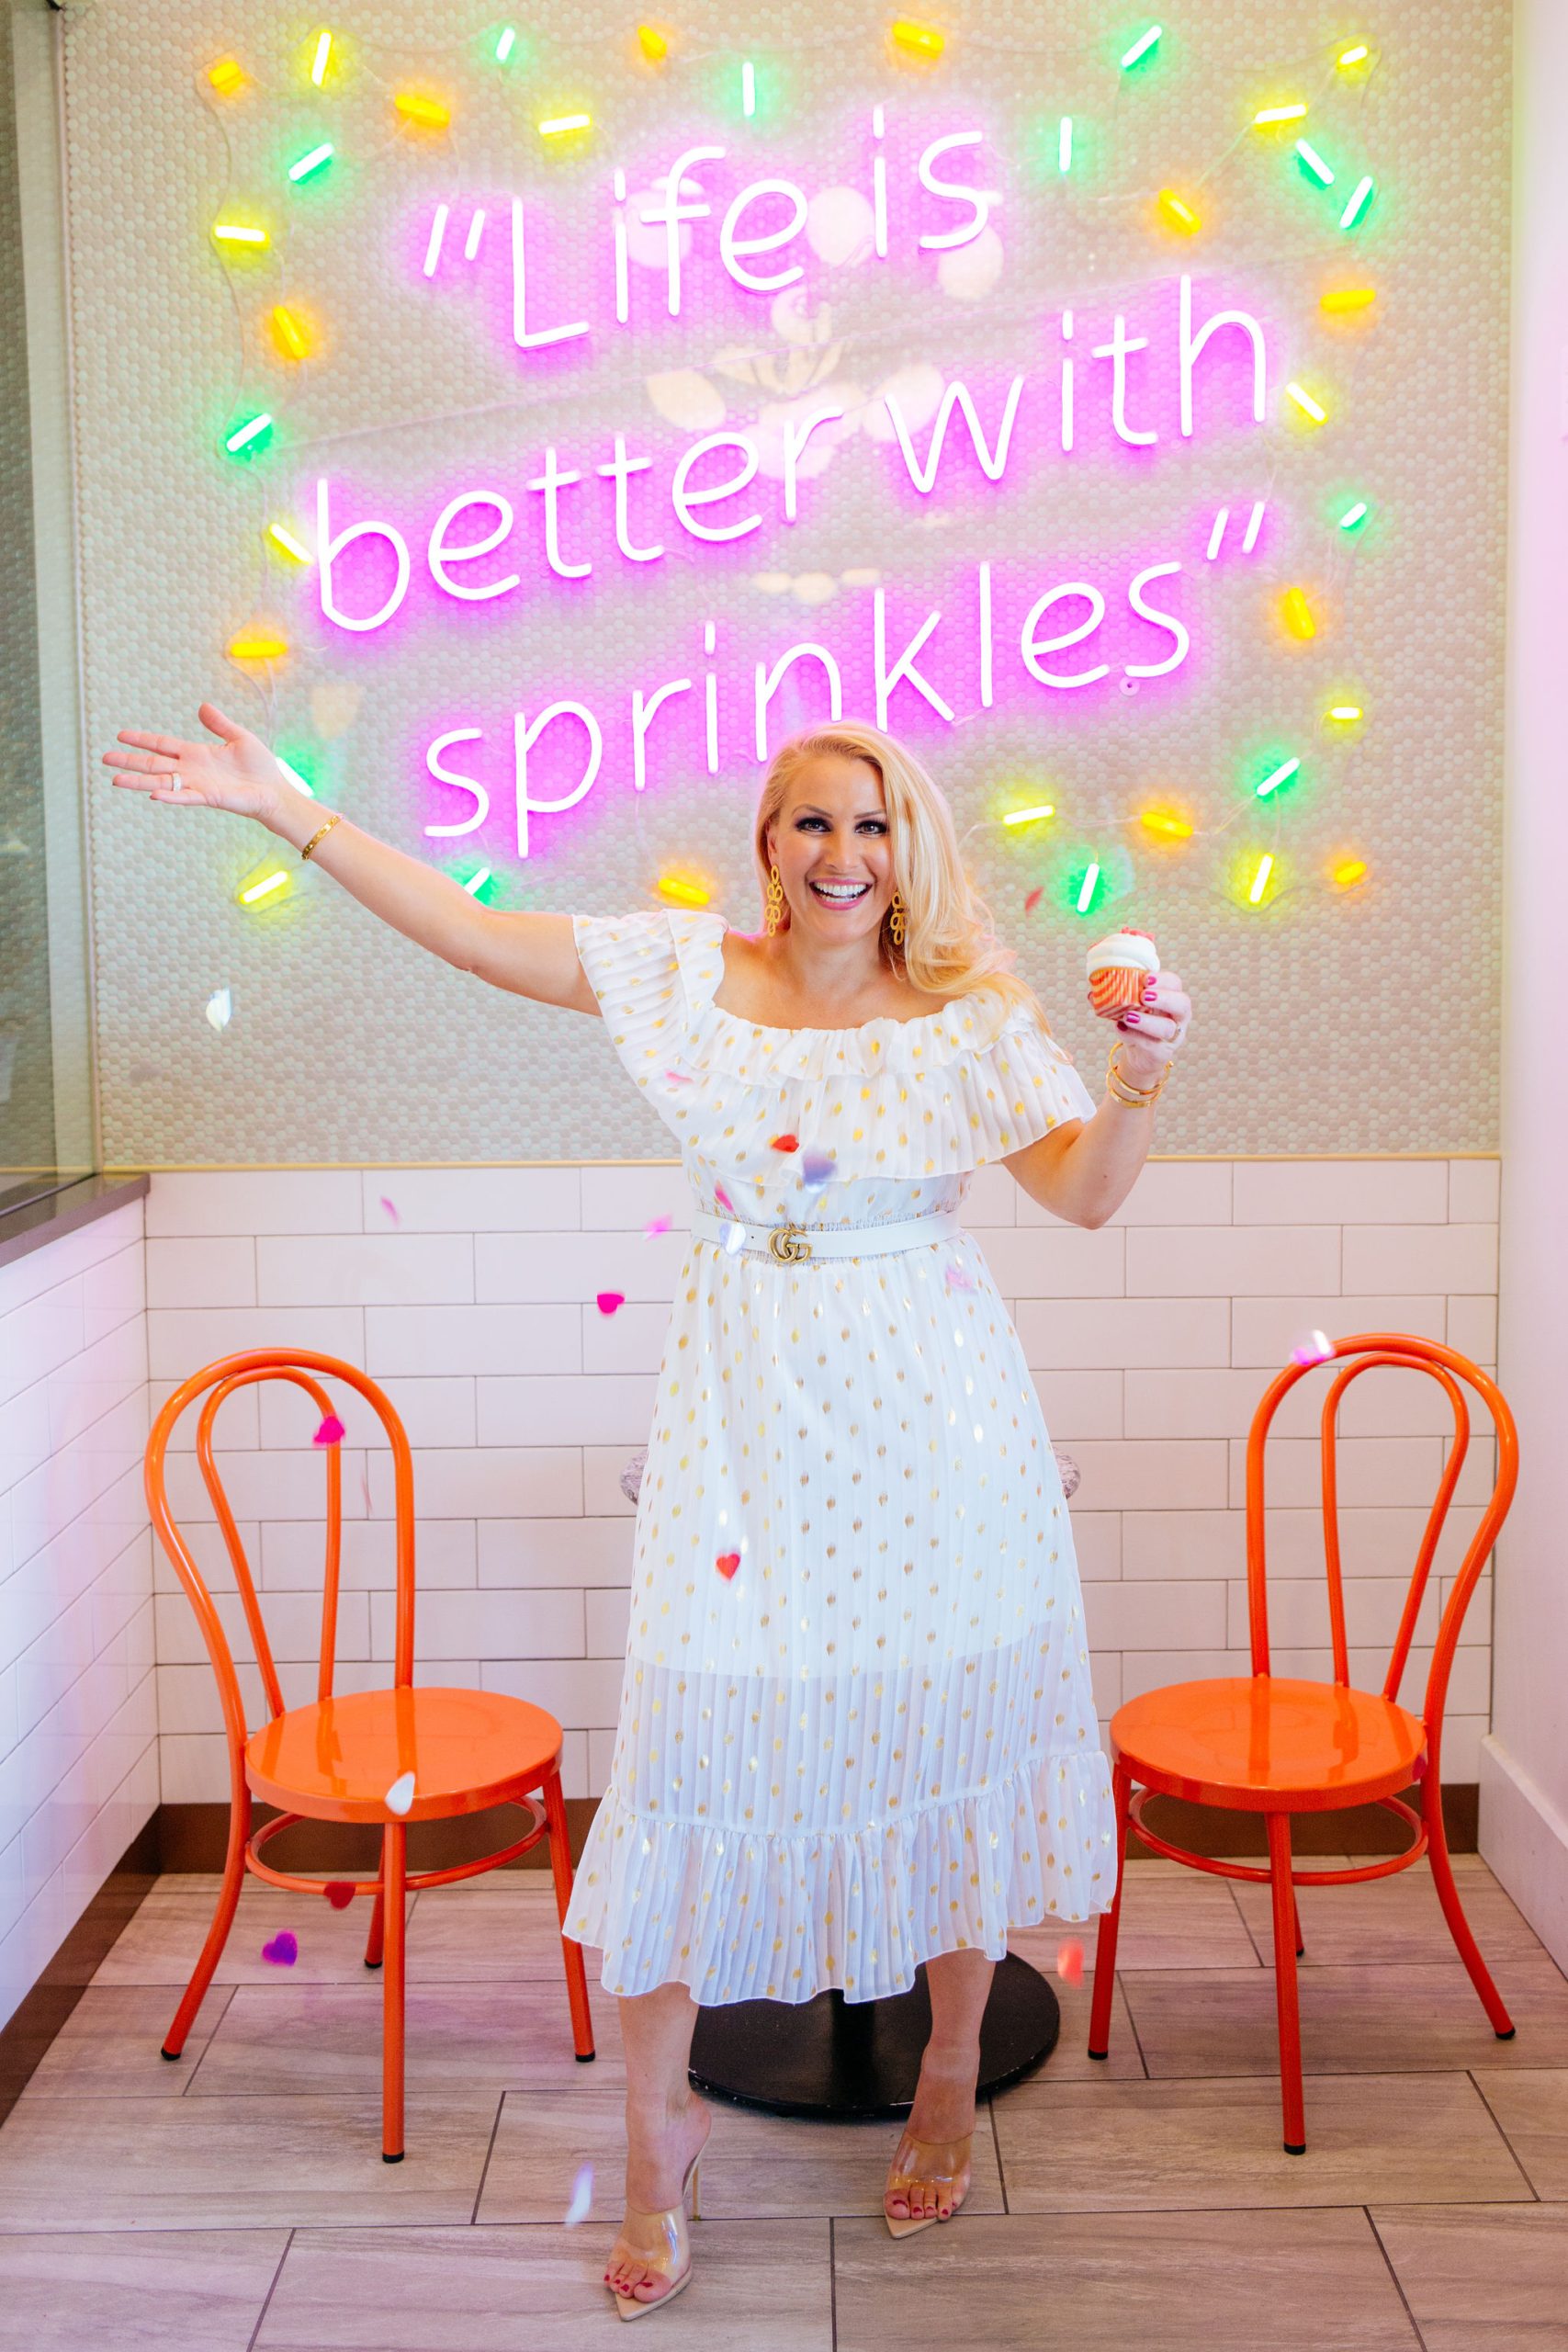 Tampa Fashion blogger Jenn Truman @jtstjtst11 is holding a cupcake and throwing heart confetti as she stands in from of the lit sign that says Life is Better with Sprinkles. She is wearing a white off the shoulder dress with gold dots from Amazon fashion, clear heels and Gold Lisi Lerch earrings.